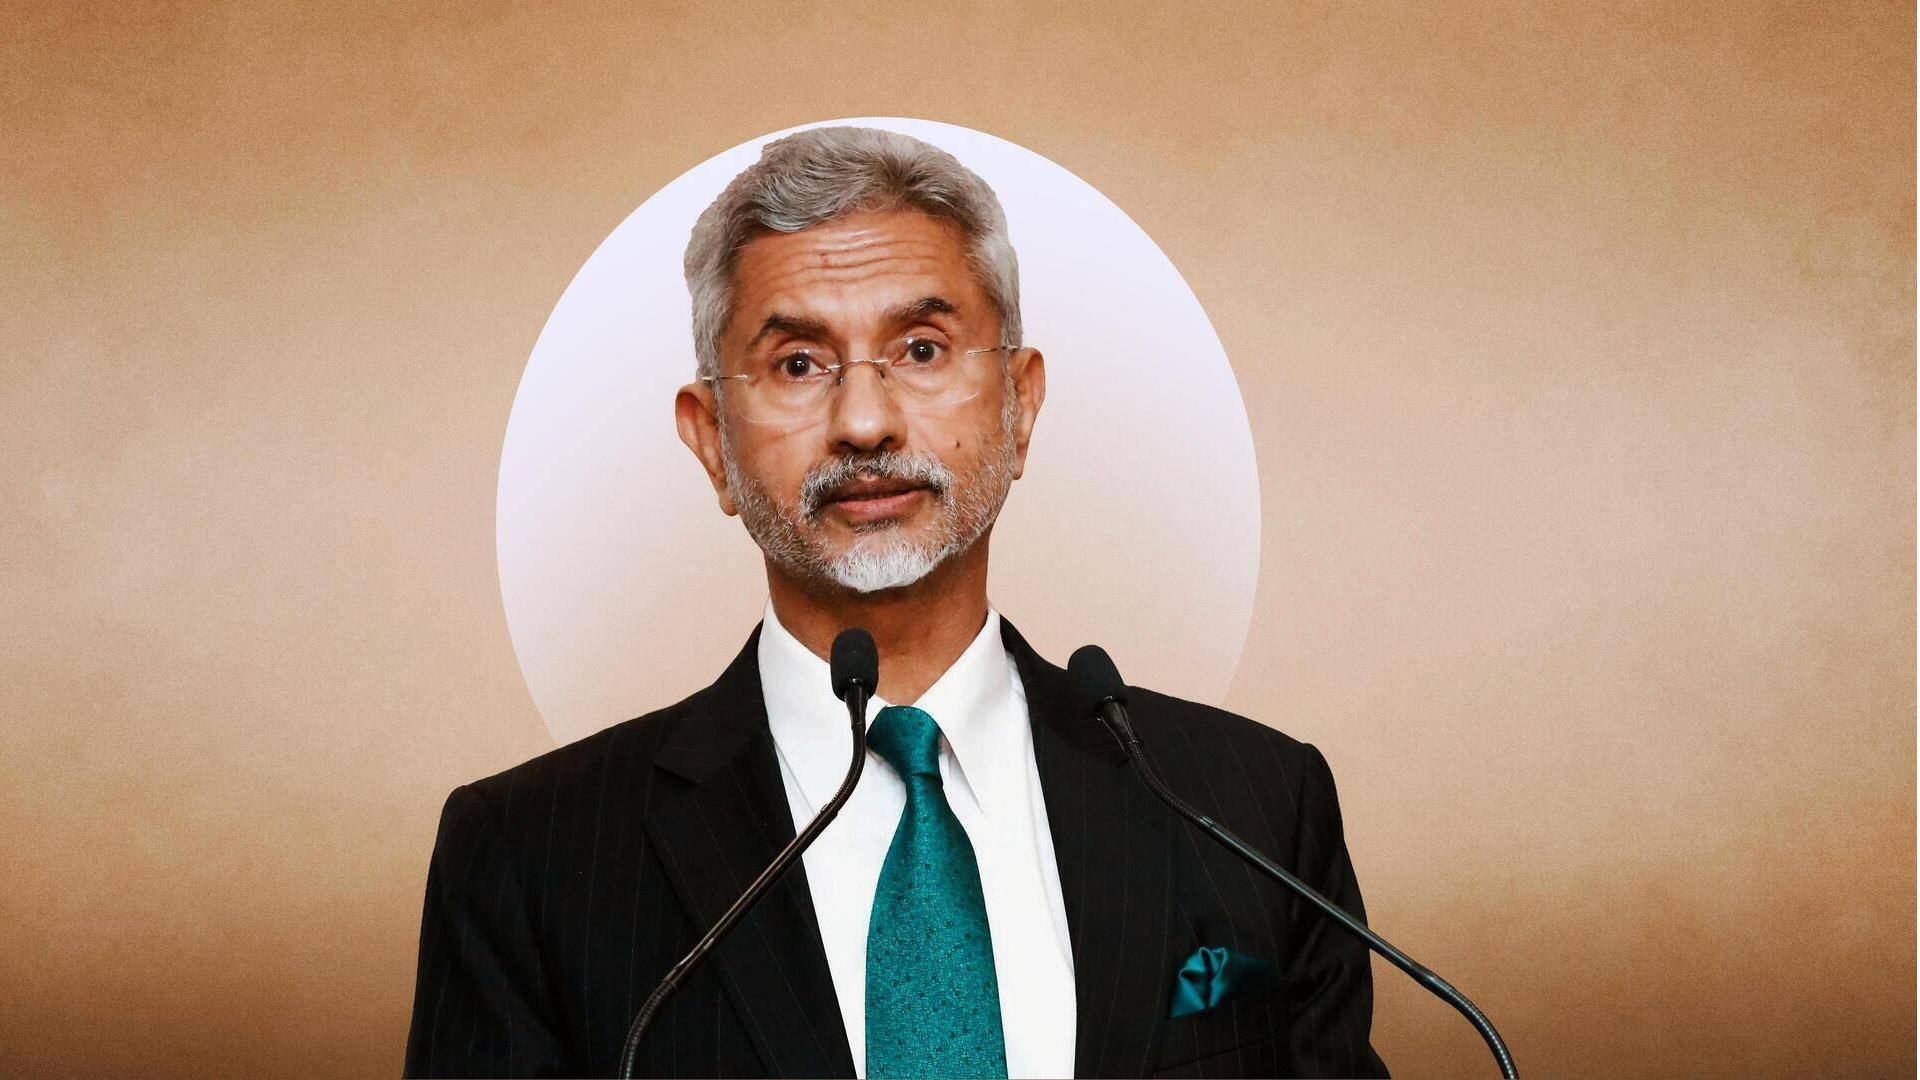 UNSC becoming increasingly ineffective in confronting key issues: Jaishankar